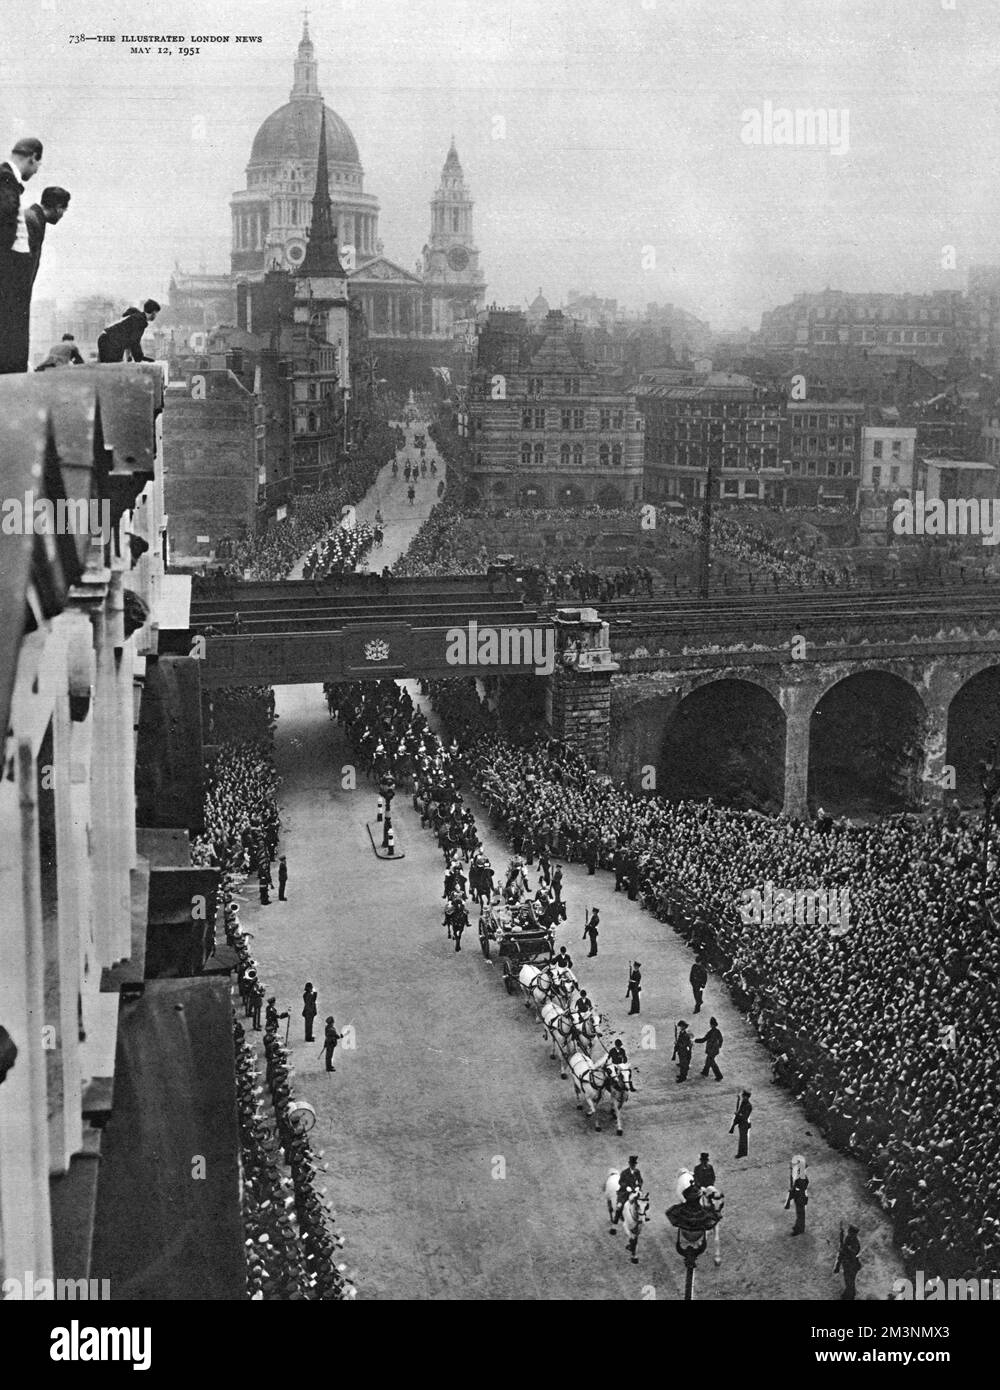 The royal procession leaving St Paul's Cathedral, London, returning to Buckingham Palace after the service of dedication and official opening of the Festival of Britain.  In the open carriage are King George VI, Queen Elizabeth and Princess Margaret.  Crowds line the road along both sides of Ludgate Hill, all the way down to Ludgate Circus and beyond.  A few people can be seen on the left, standing on the roof of an office building.     Date: 3 May 1951 Stock Photo